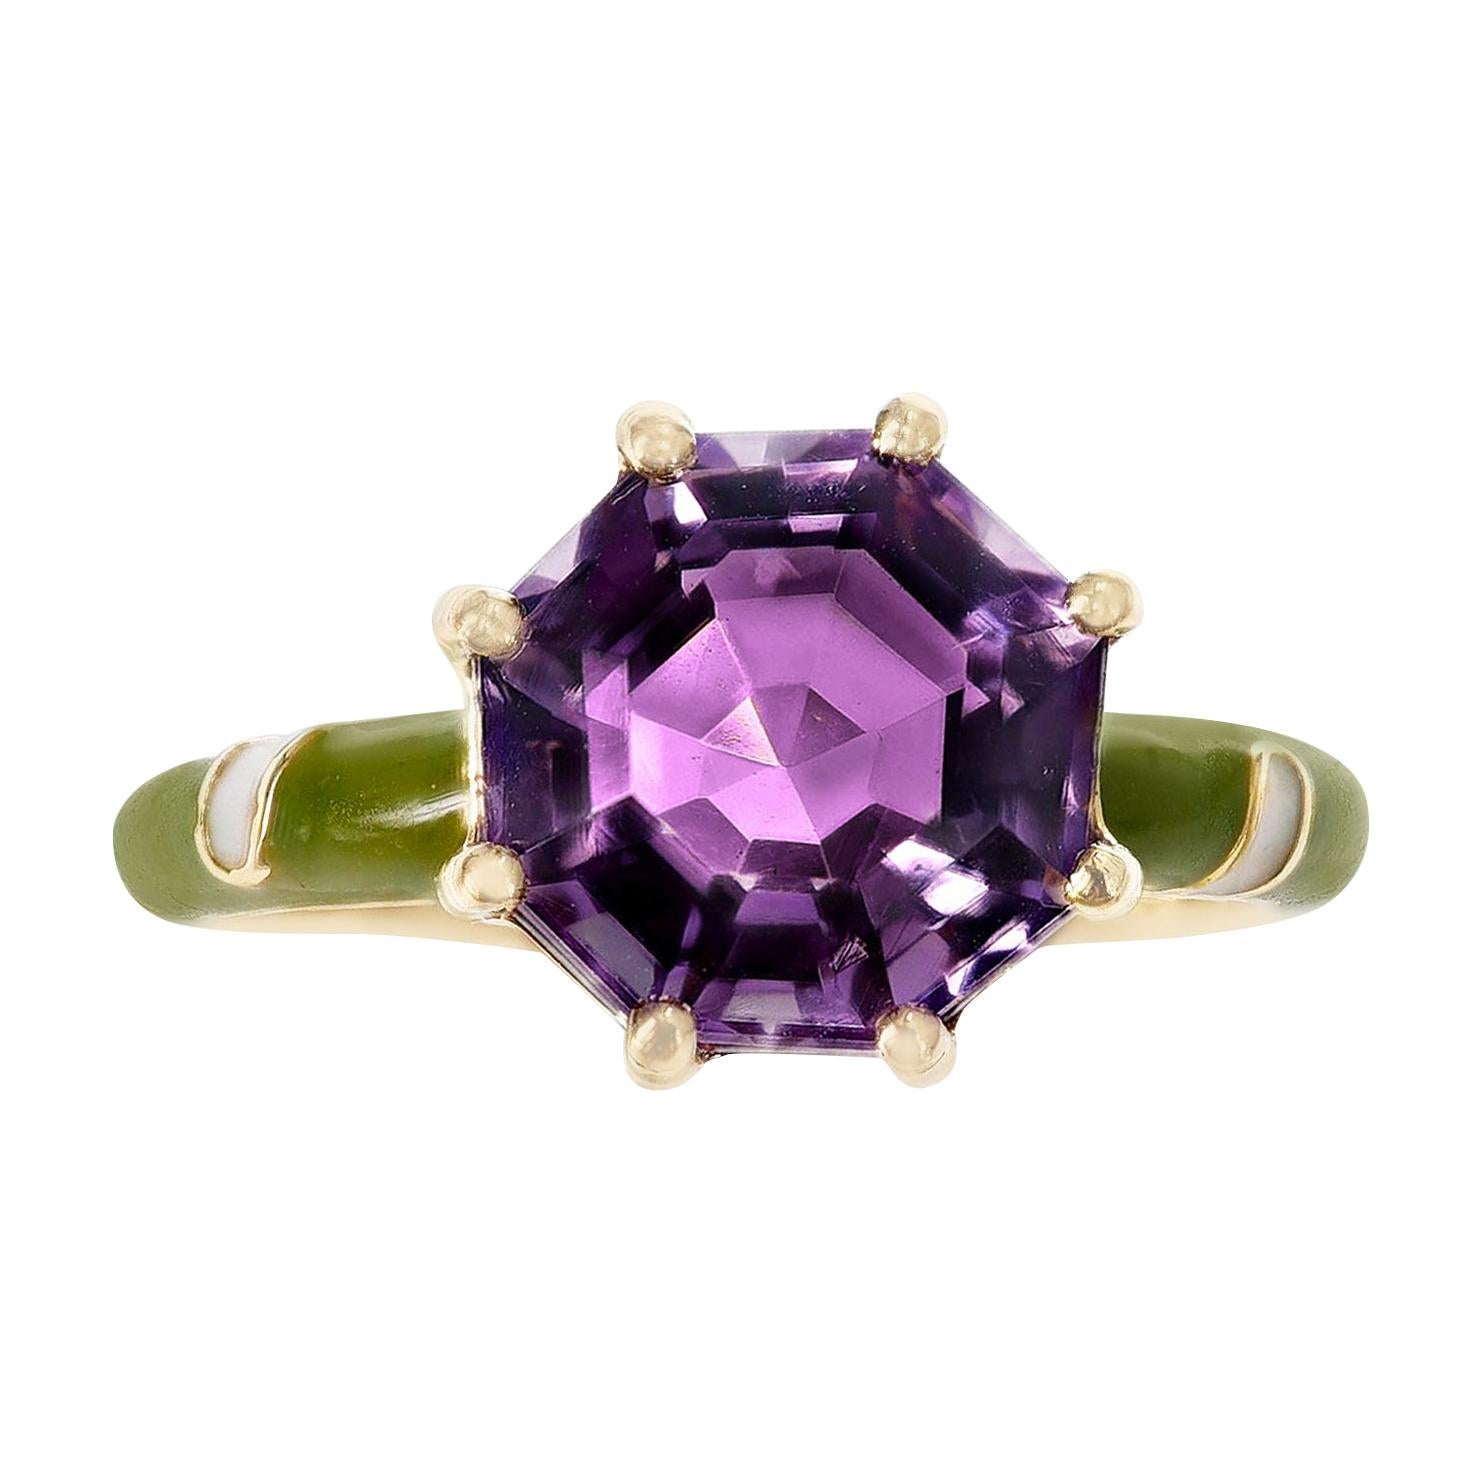 2.48 Ct. Octagonal Amethyst with Green and White Enamel, 14k Yellow Gold